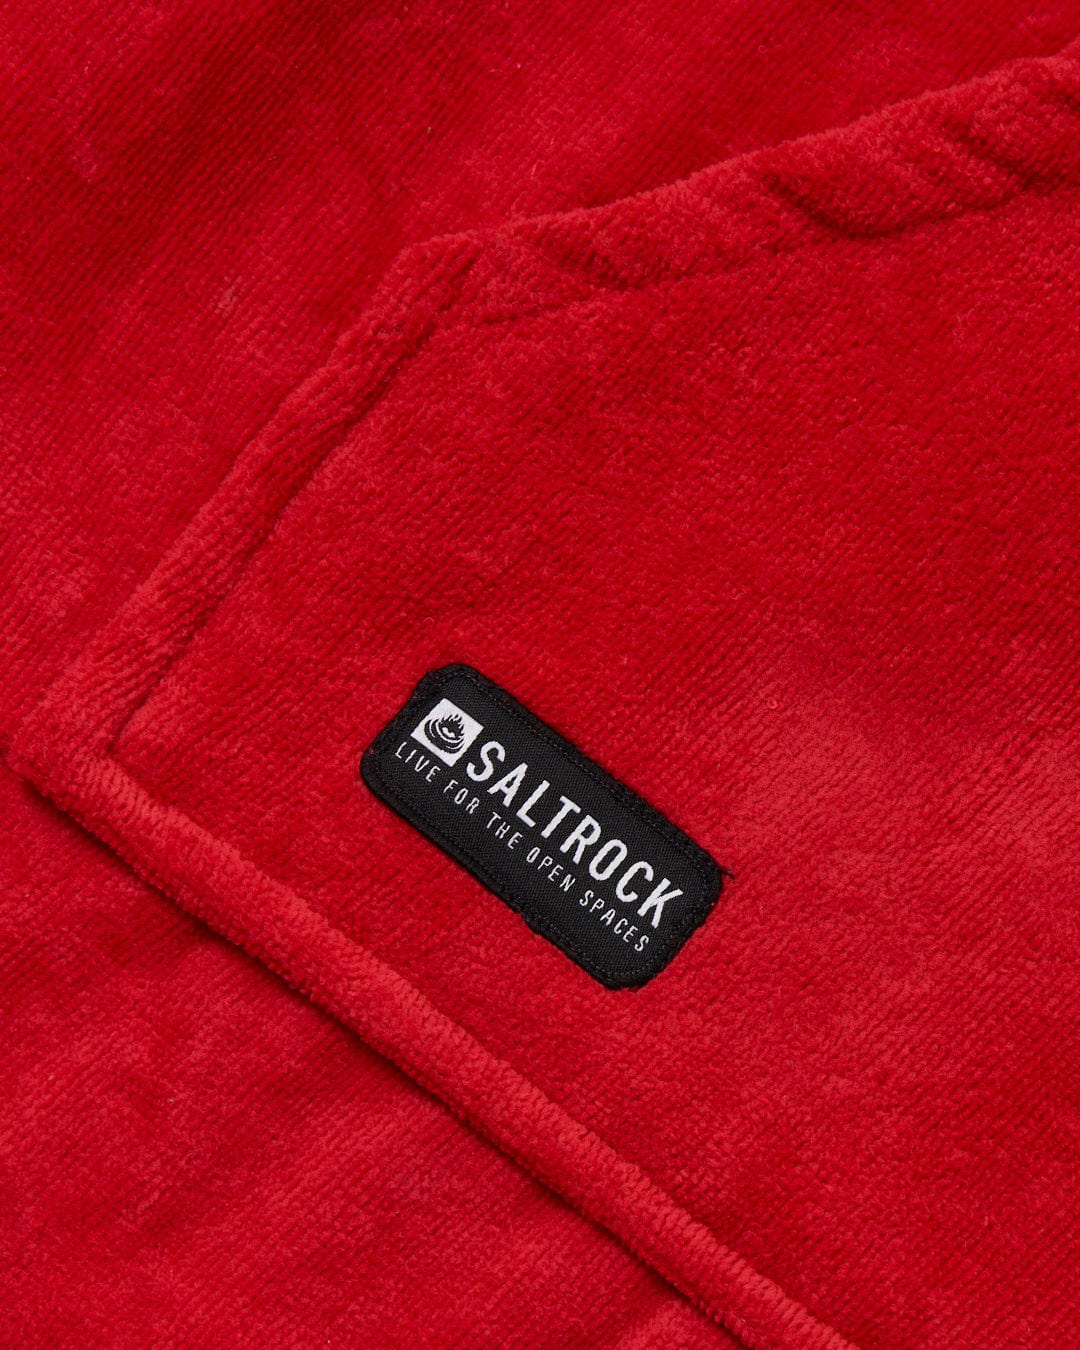 Close-up of a red, absorbent cotton towel with a black Saltrock brand label.